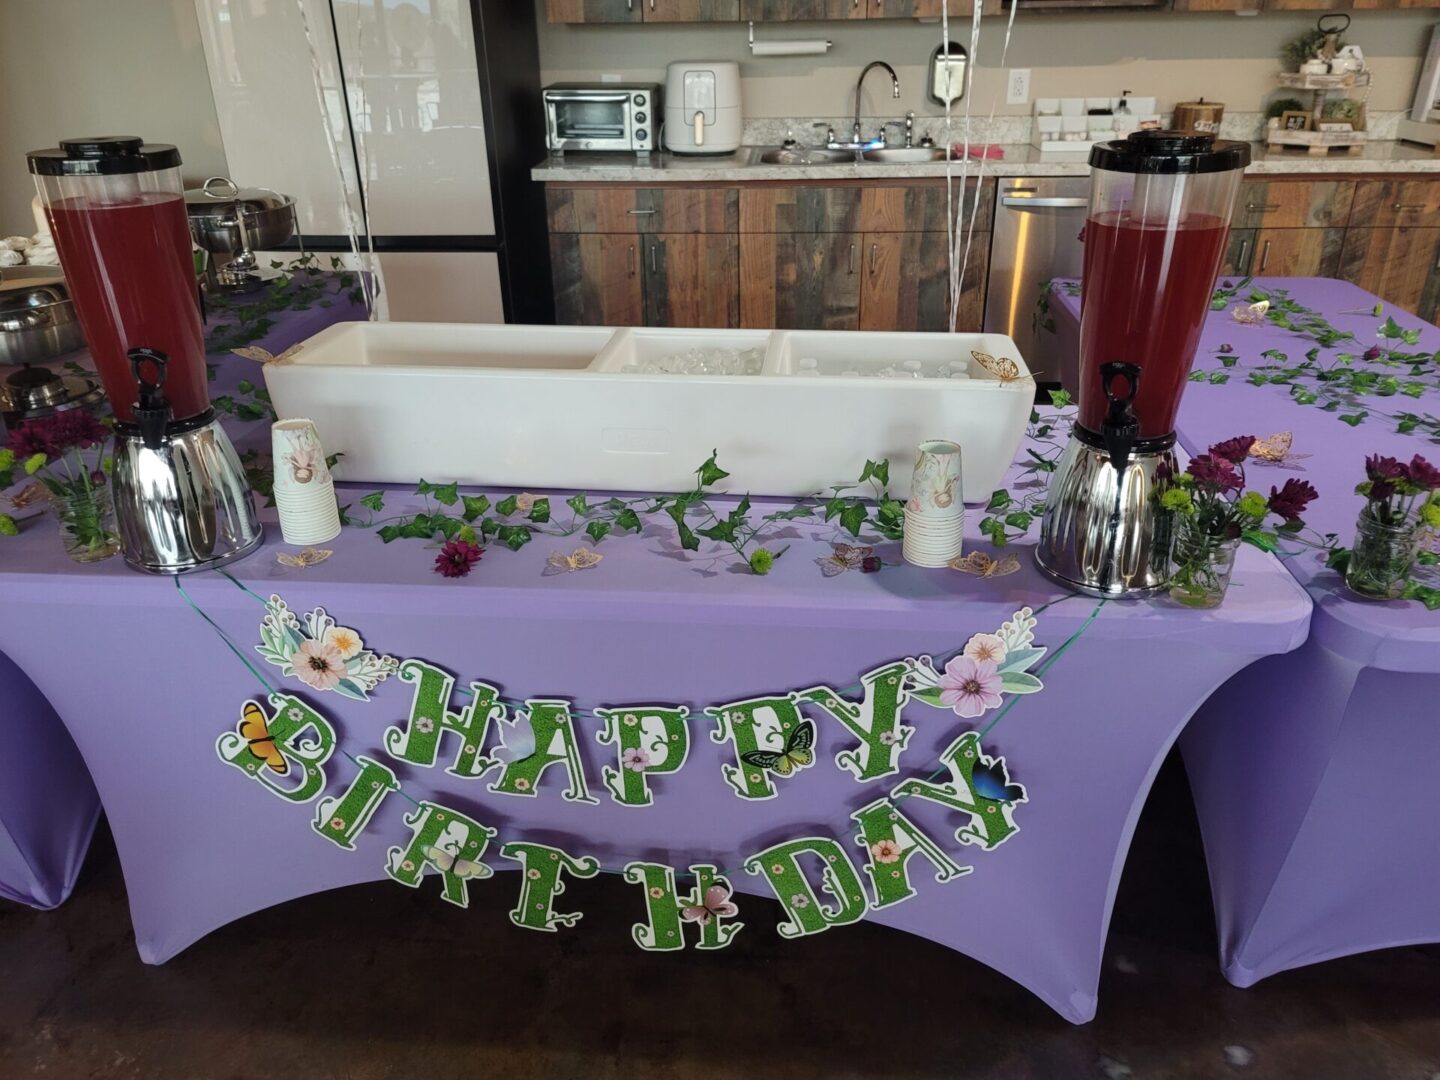 A table with purple cloth and drinks on it